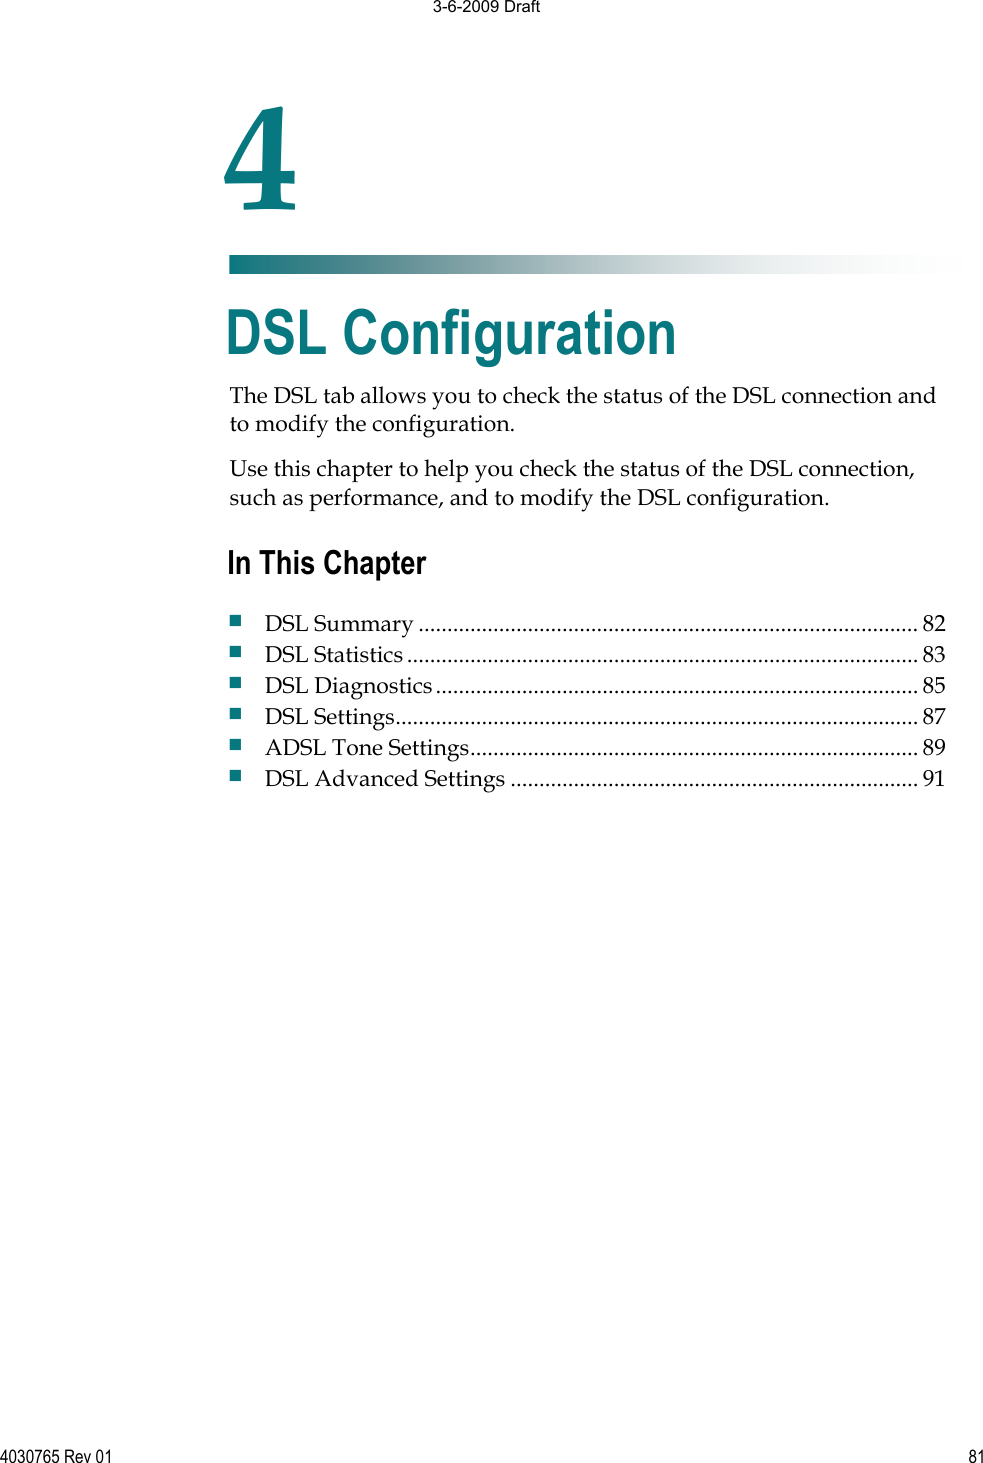 4030765 Rev 01 81The DSL tab allows you to check the status of the DSL connection and to modify the configuration. Use this chapter to help you check the status of the DSL connection, such as performance, and to modify the DSL configuration. 4Chapter 4DSL Configuration In This Chapter DSL Summary ....................................................................................... 82 DSL Statistics......................................................................................... 83 DSL Diagnostics.................................................................................... 85 DSL Settings........................................................................................... 87 ADSL Tone Settings.............................................................................. 89 DSL Advanced Settings ....................................................................... 91 3-6-2009 Draft